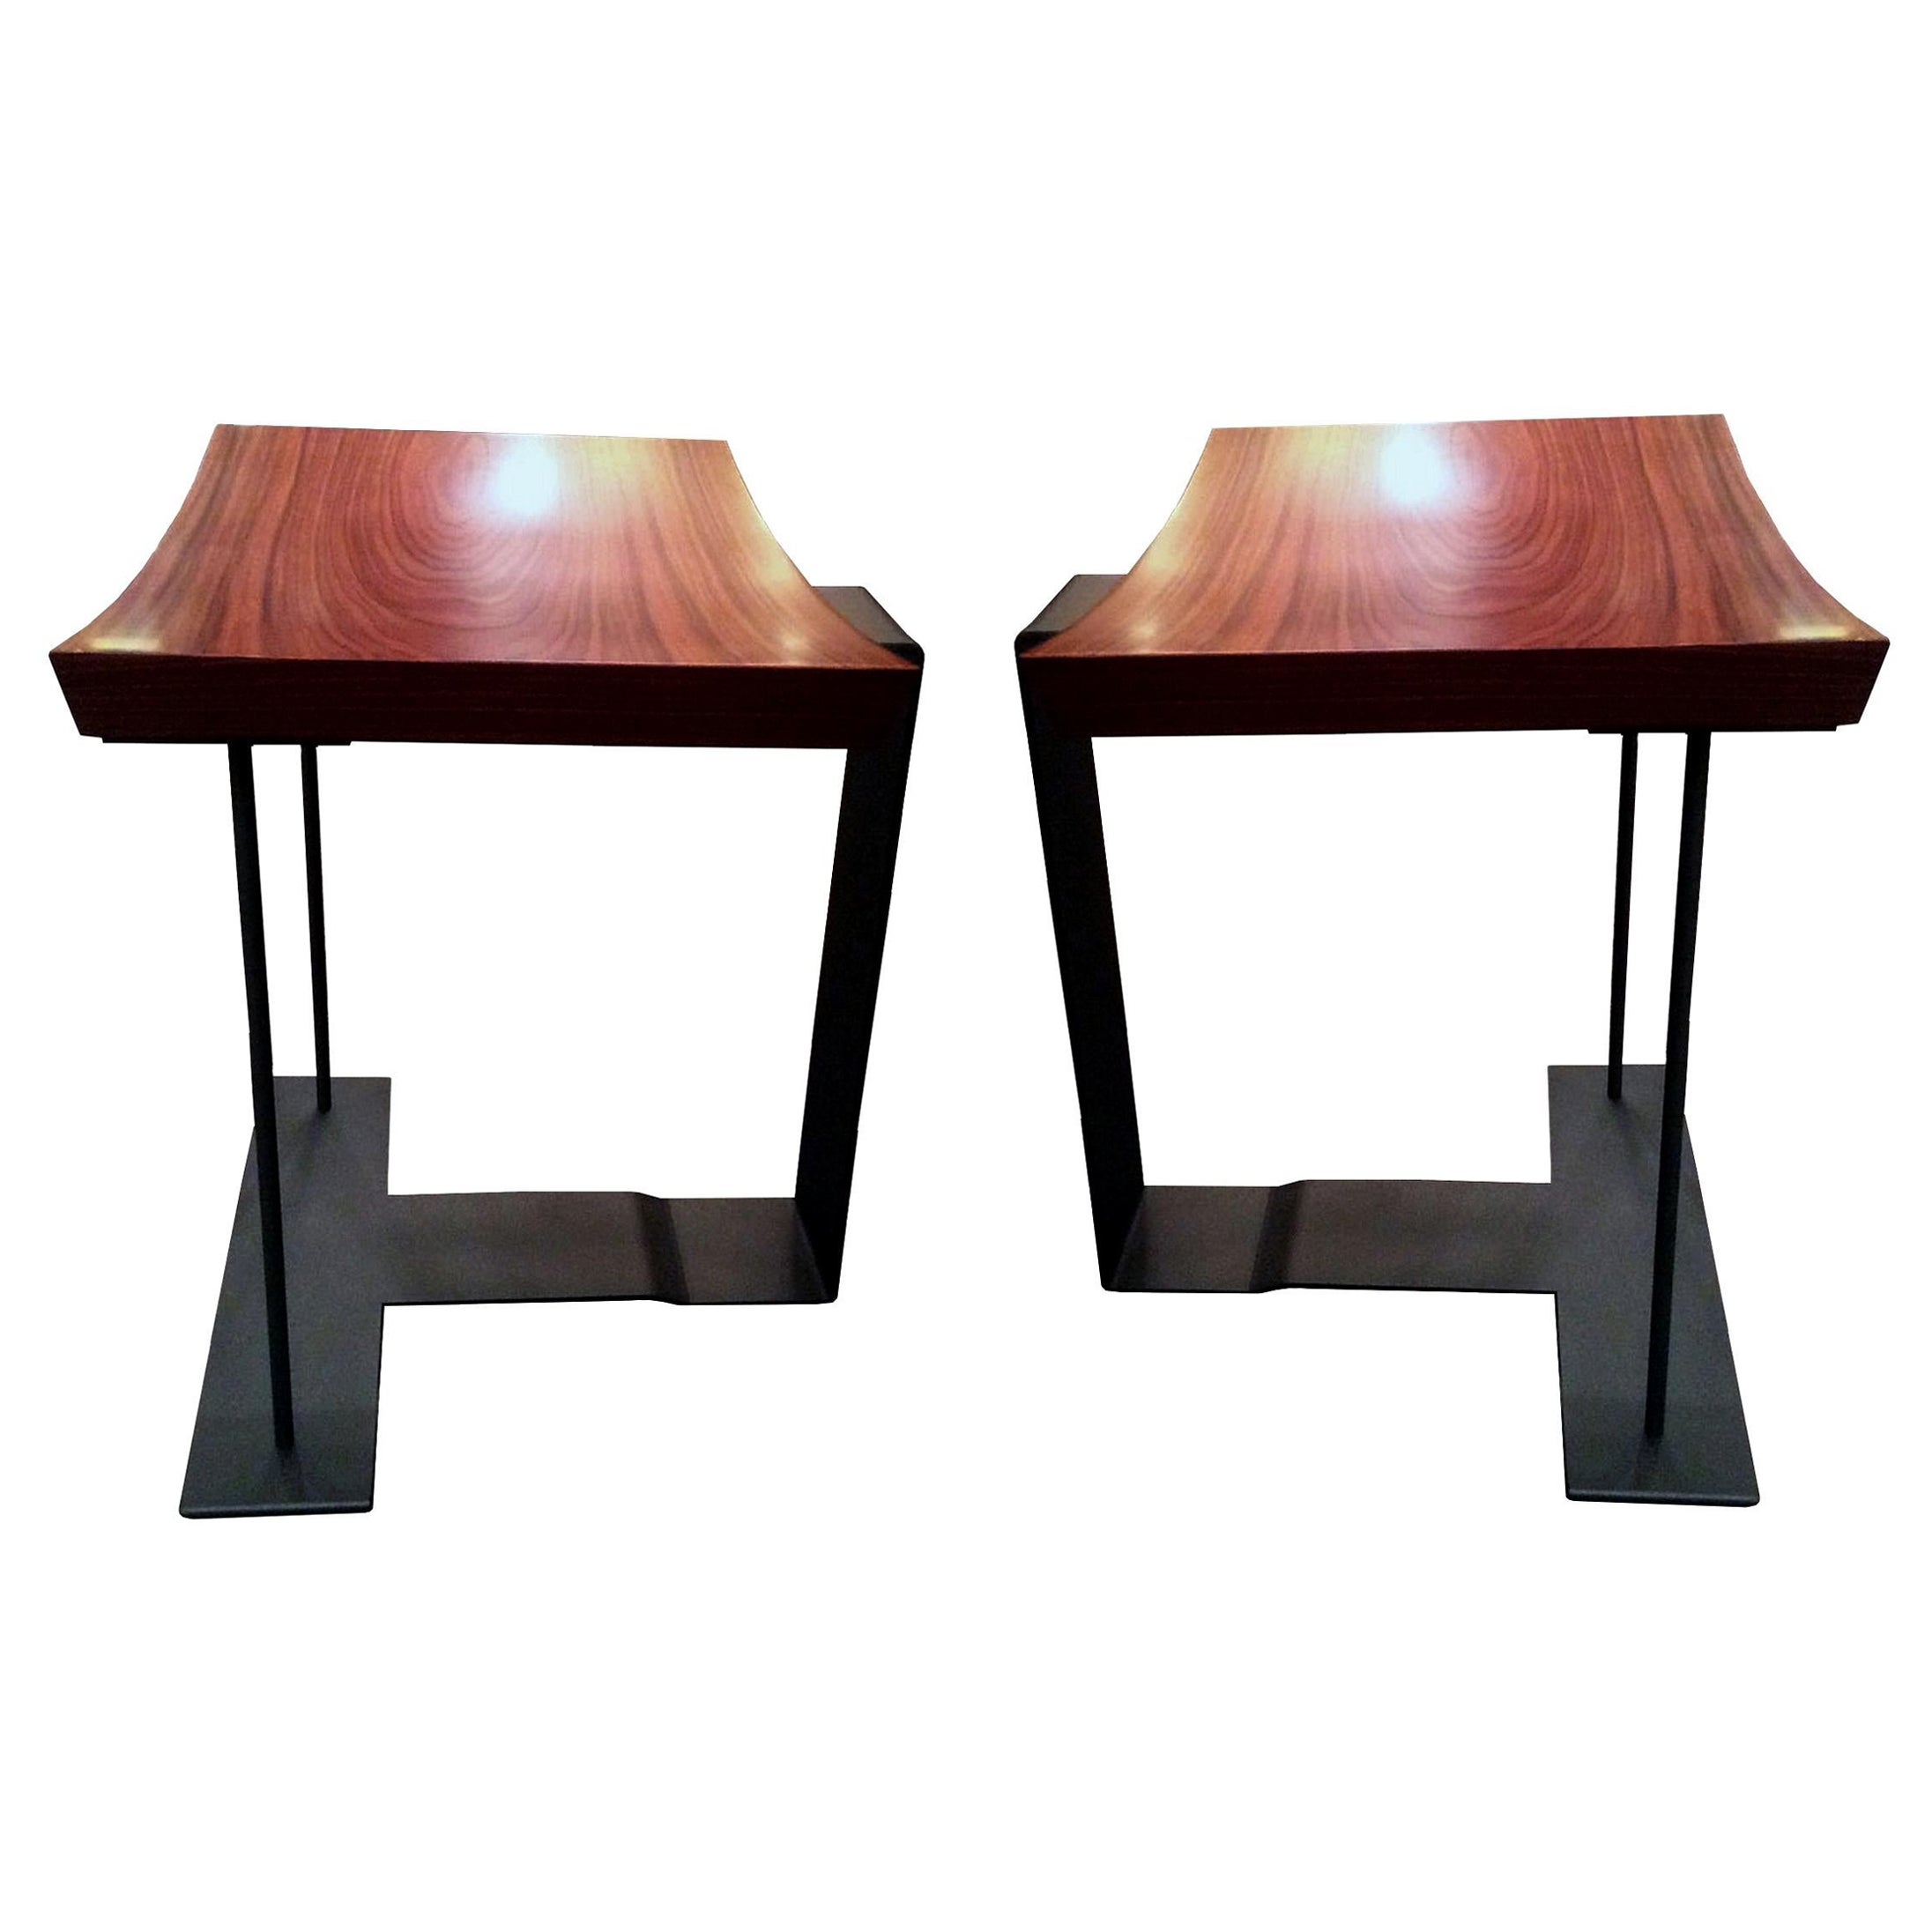 Two End of 20th Century "T 1927" Stools by Pierre Chareau. Ecart International